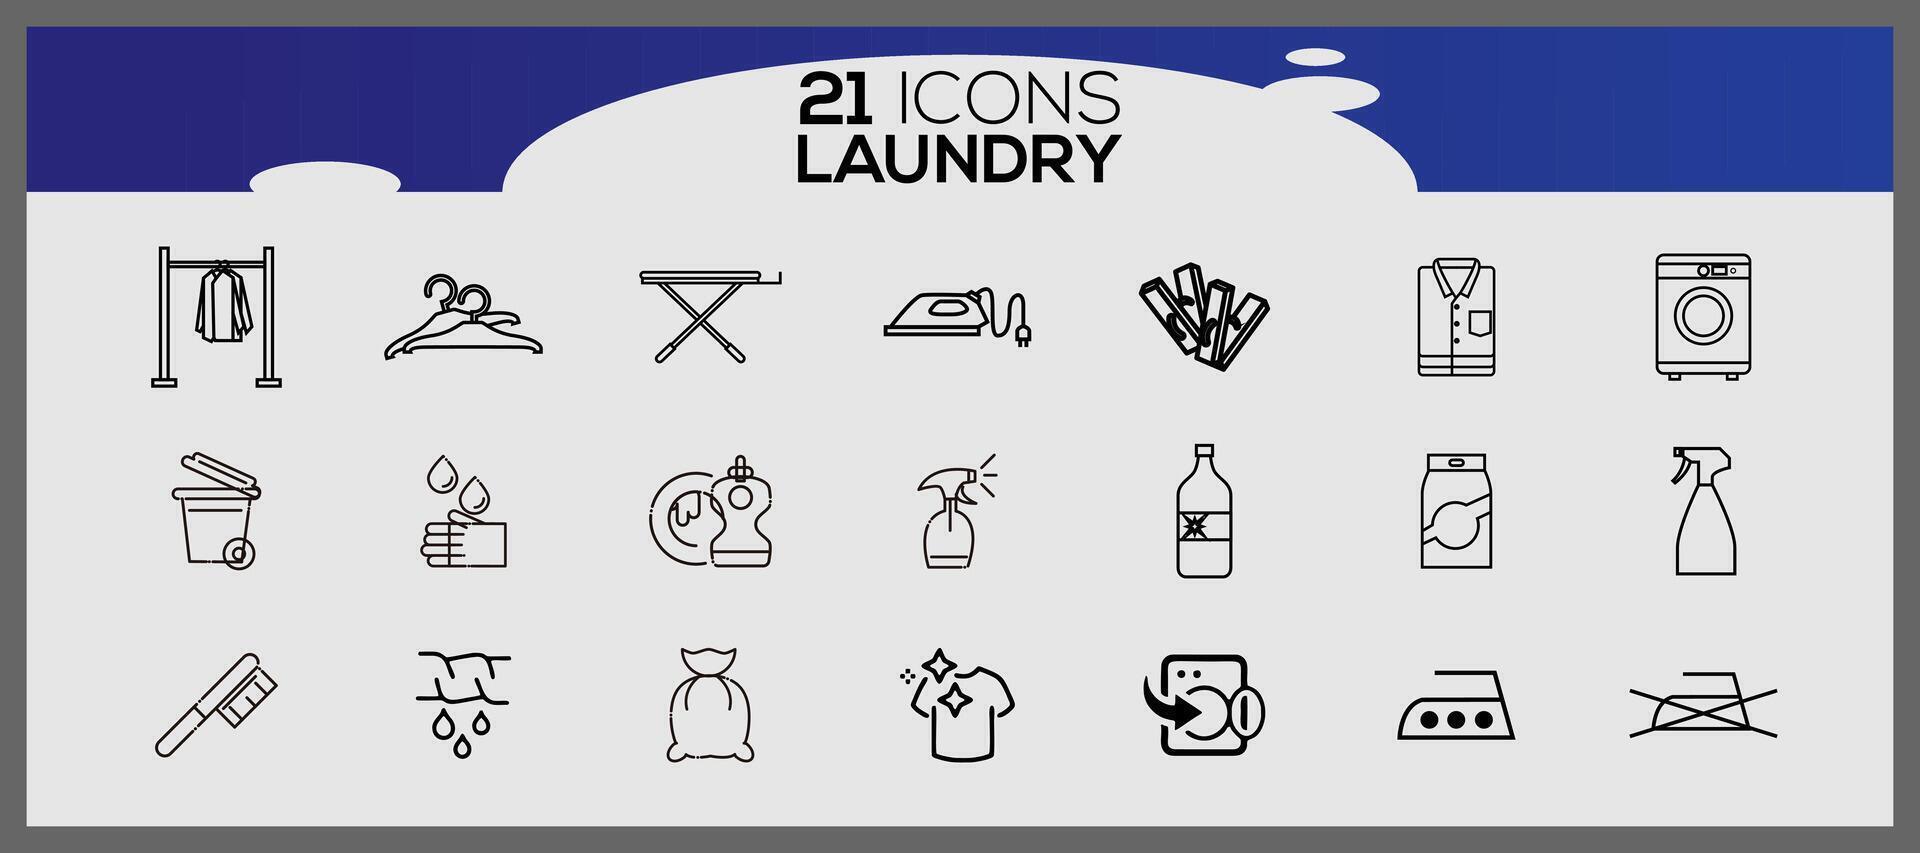 Washing icons and laundry symbols in flat style. Clean laundry and dryer service line icons. vector